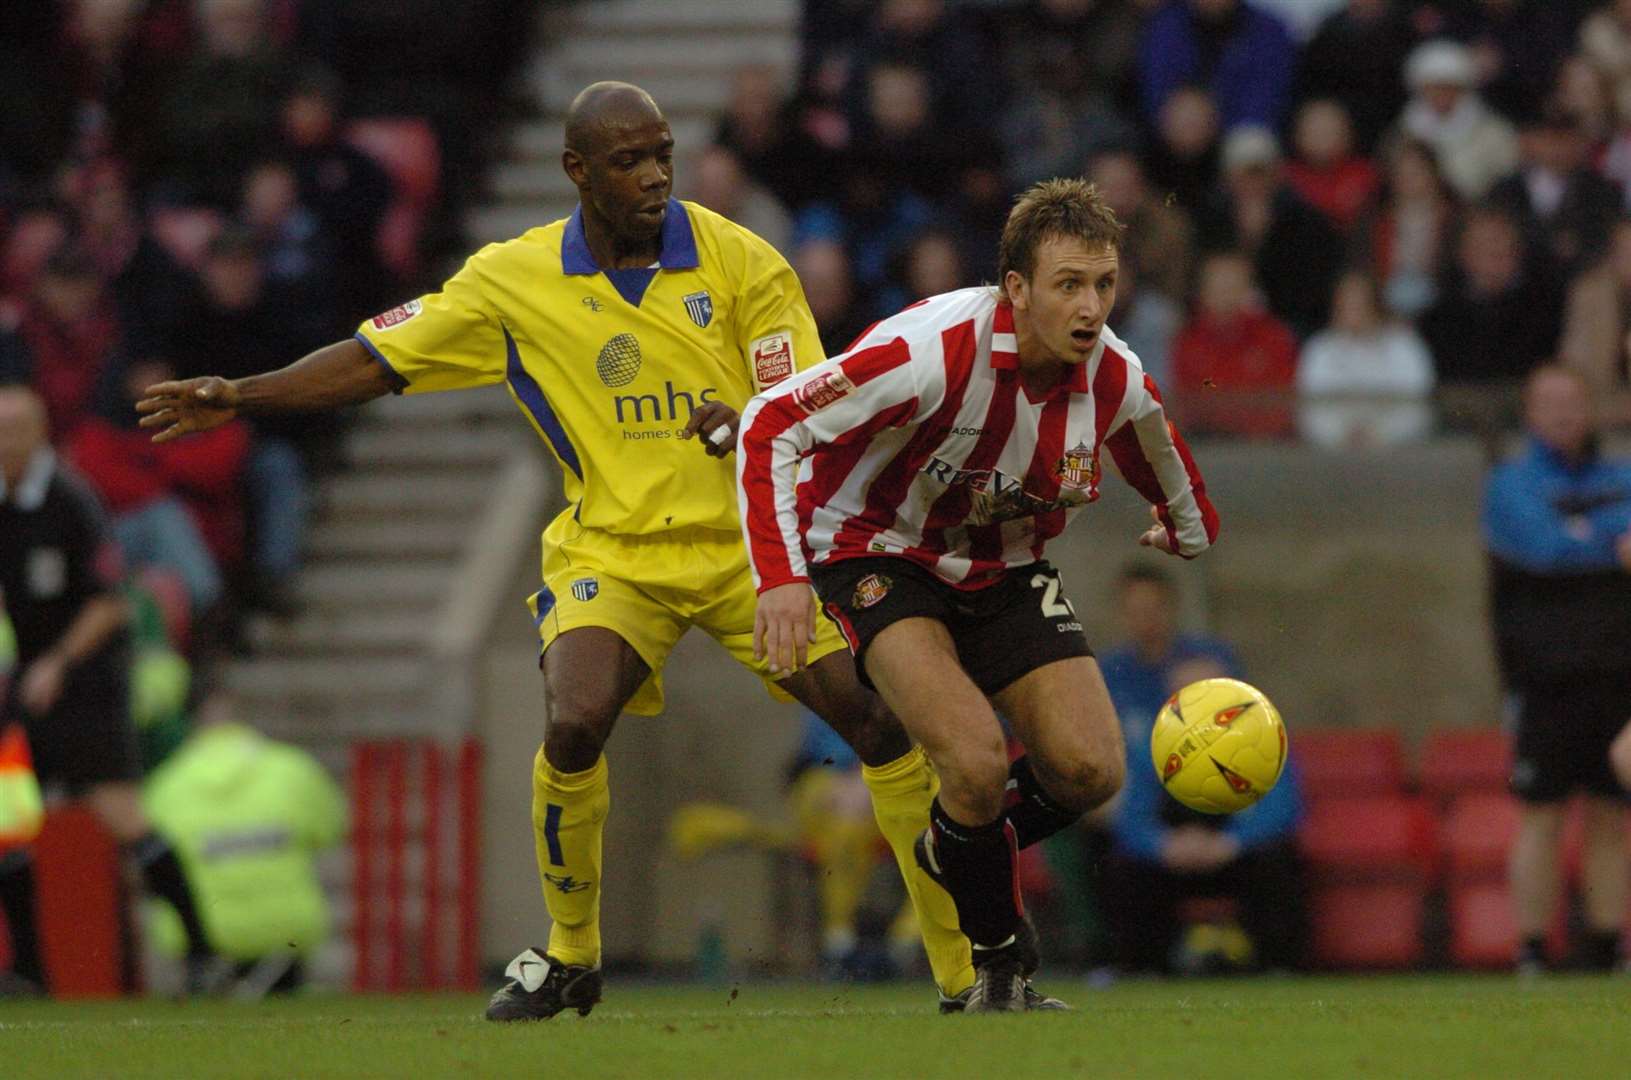 The last time Gills clashed with Sunderland they held their own, drawing 1-1 at the Stadium of Light in January 2005 Picture: Grant Falvey